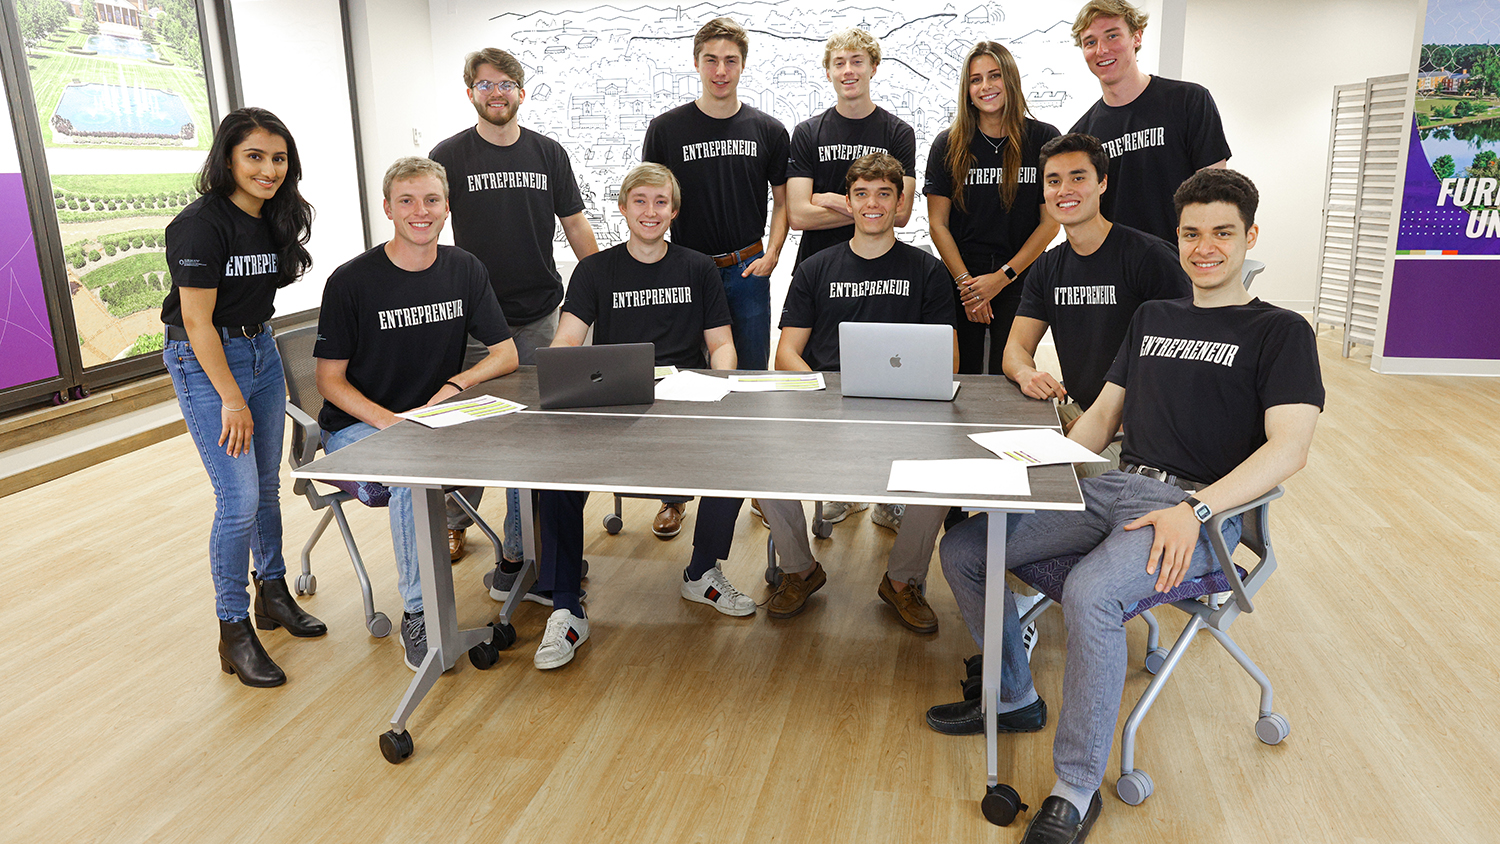 A group photo of students, all wearing black t-shirts that read "entrepreneur". 